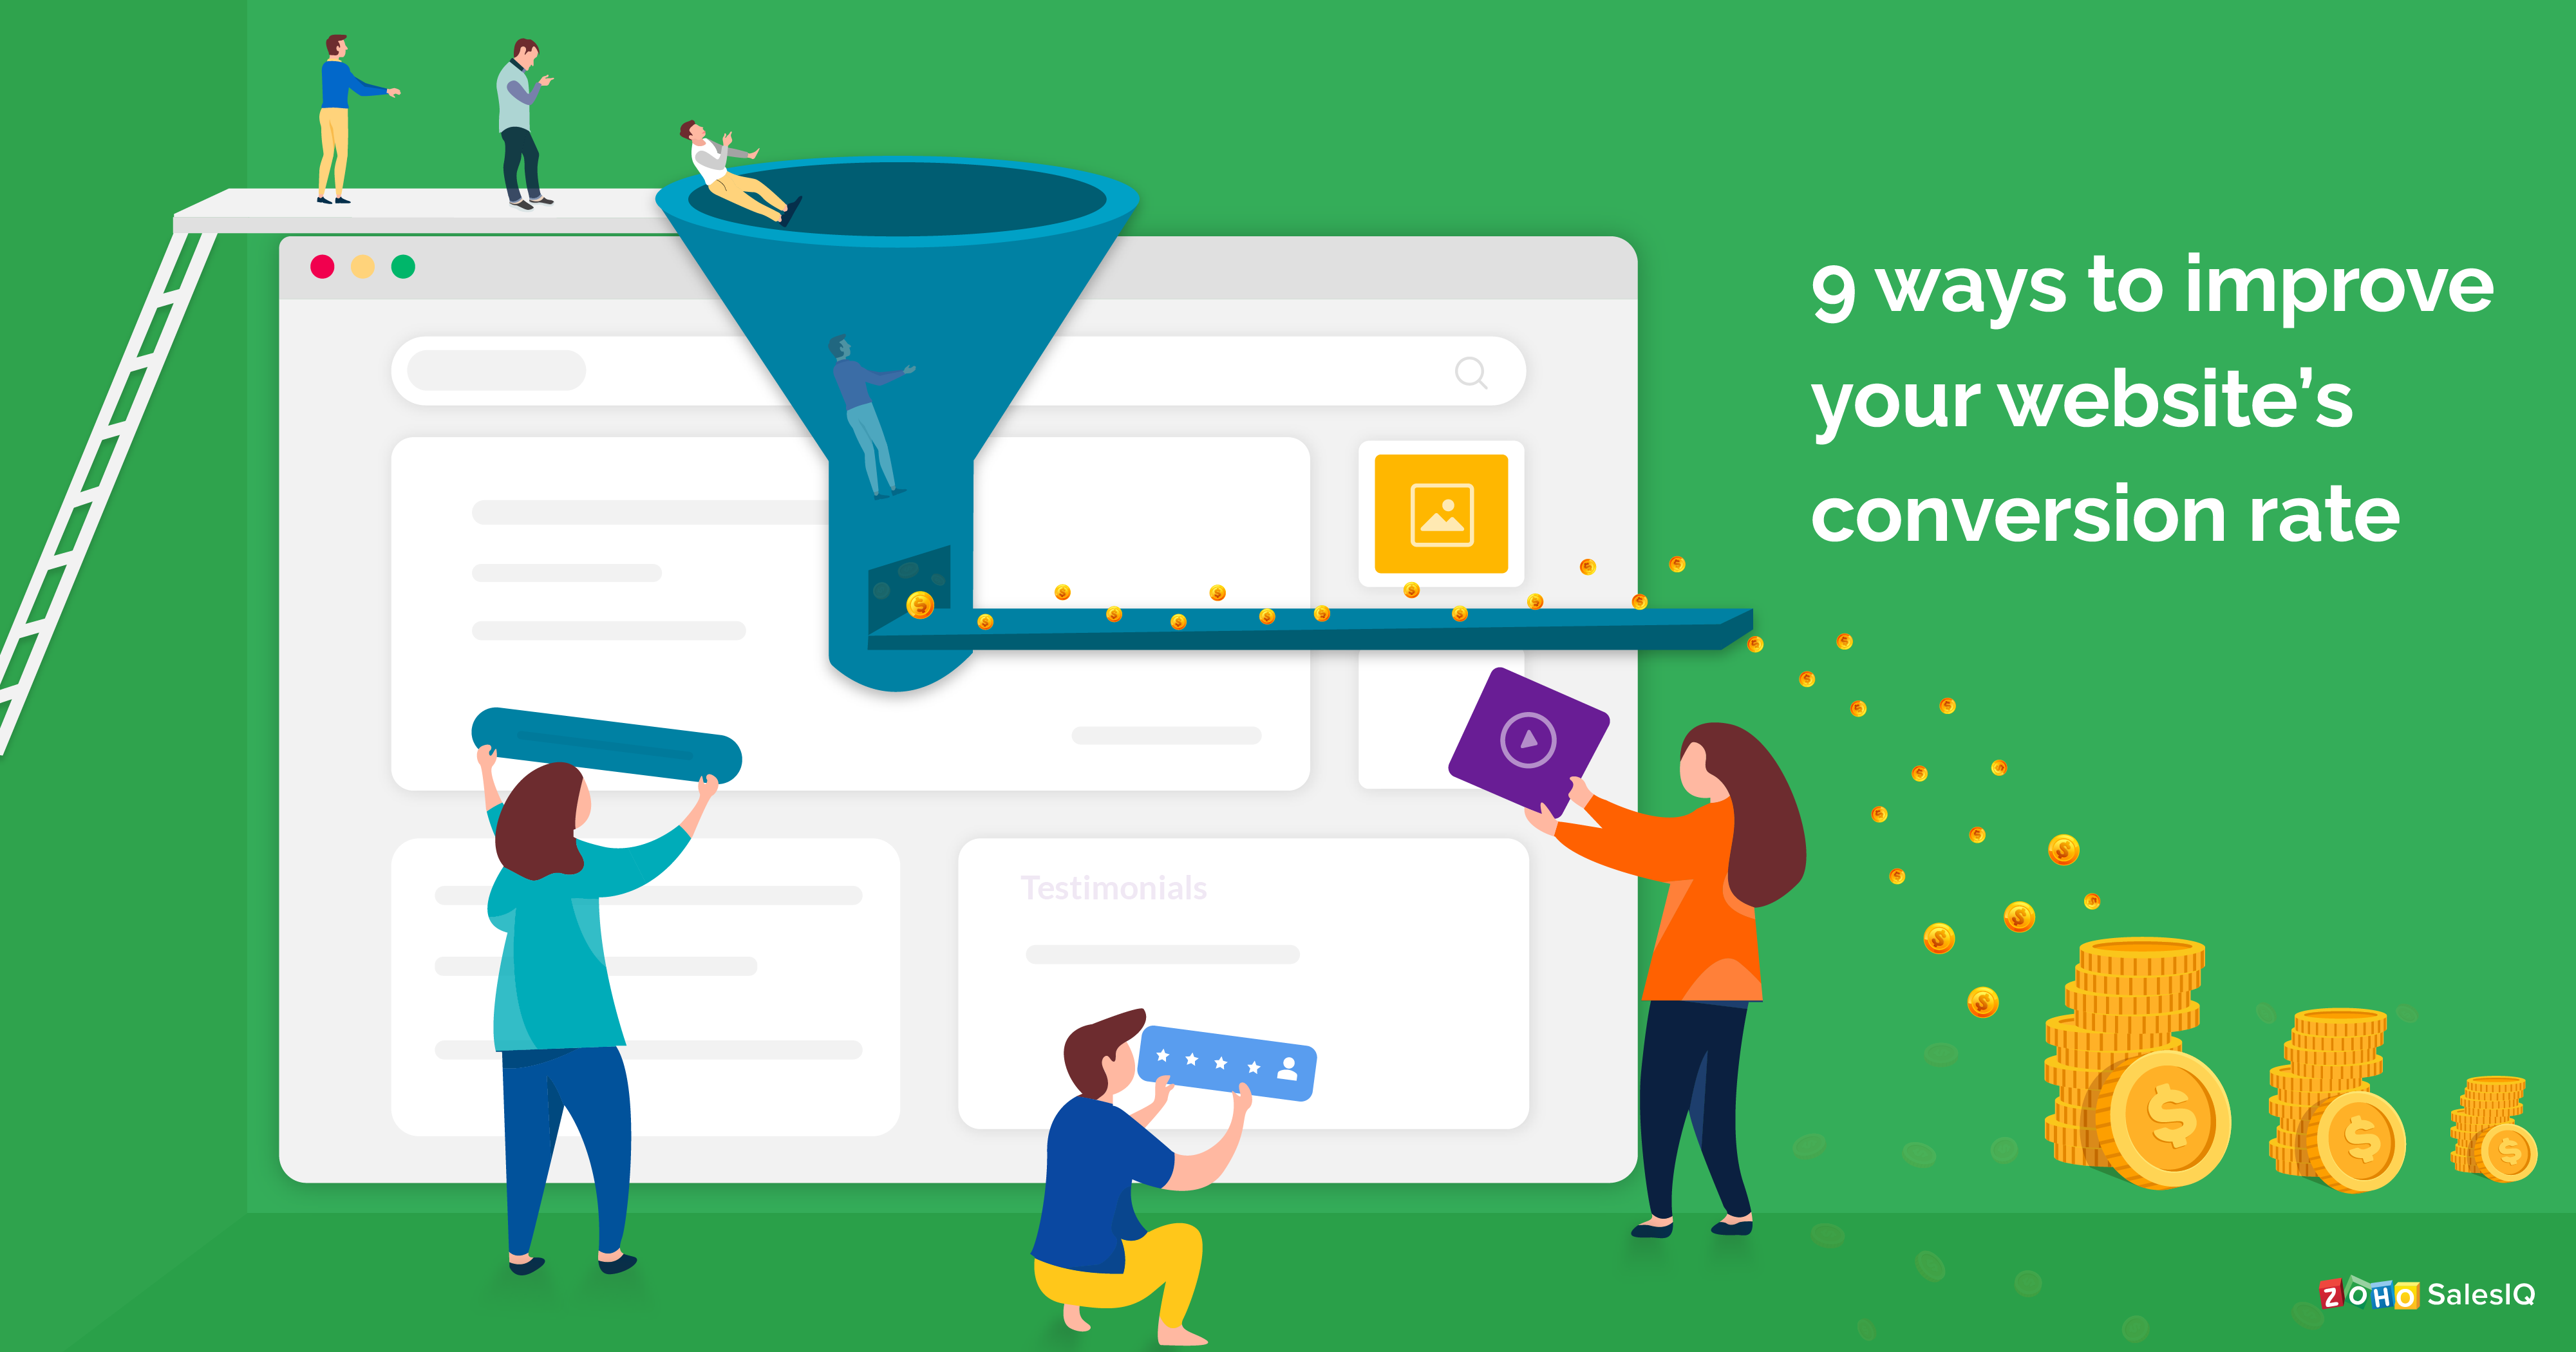 9 ways to increase your website conversion rate